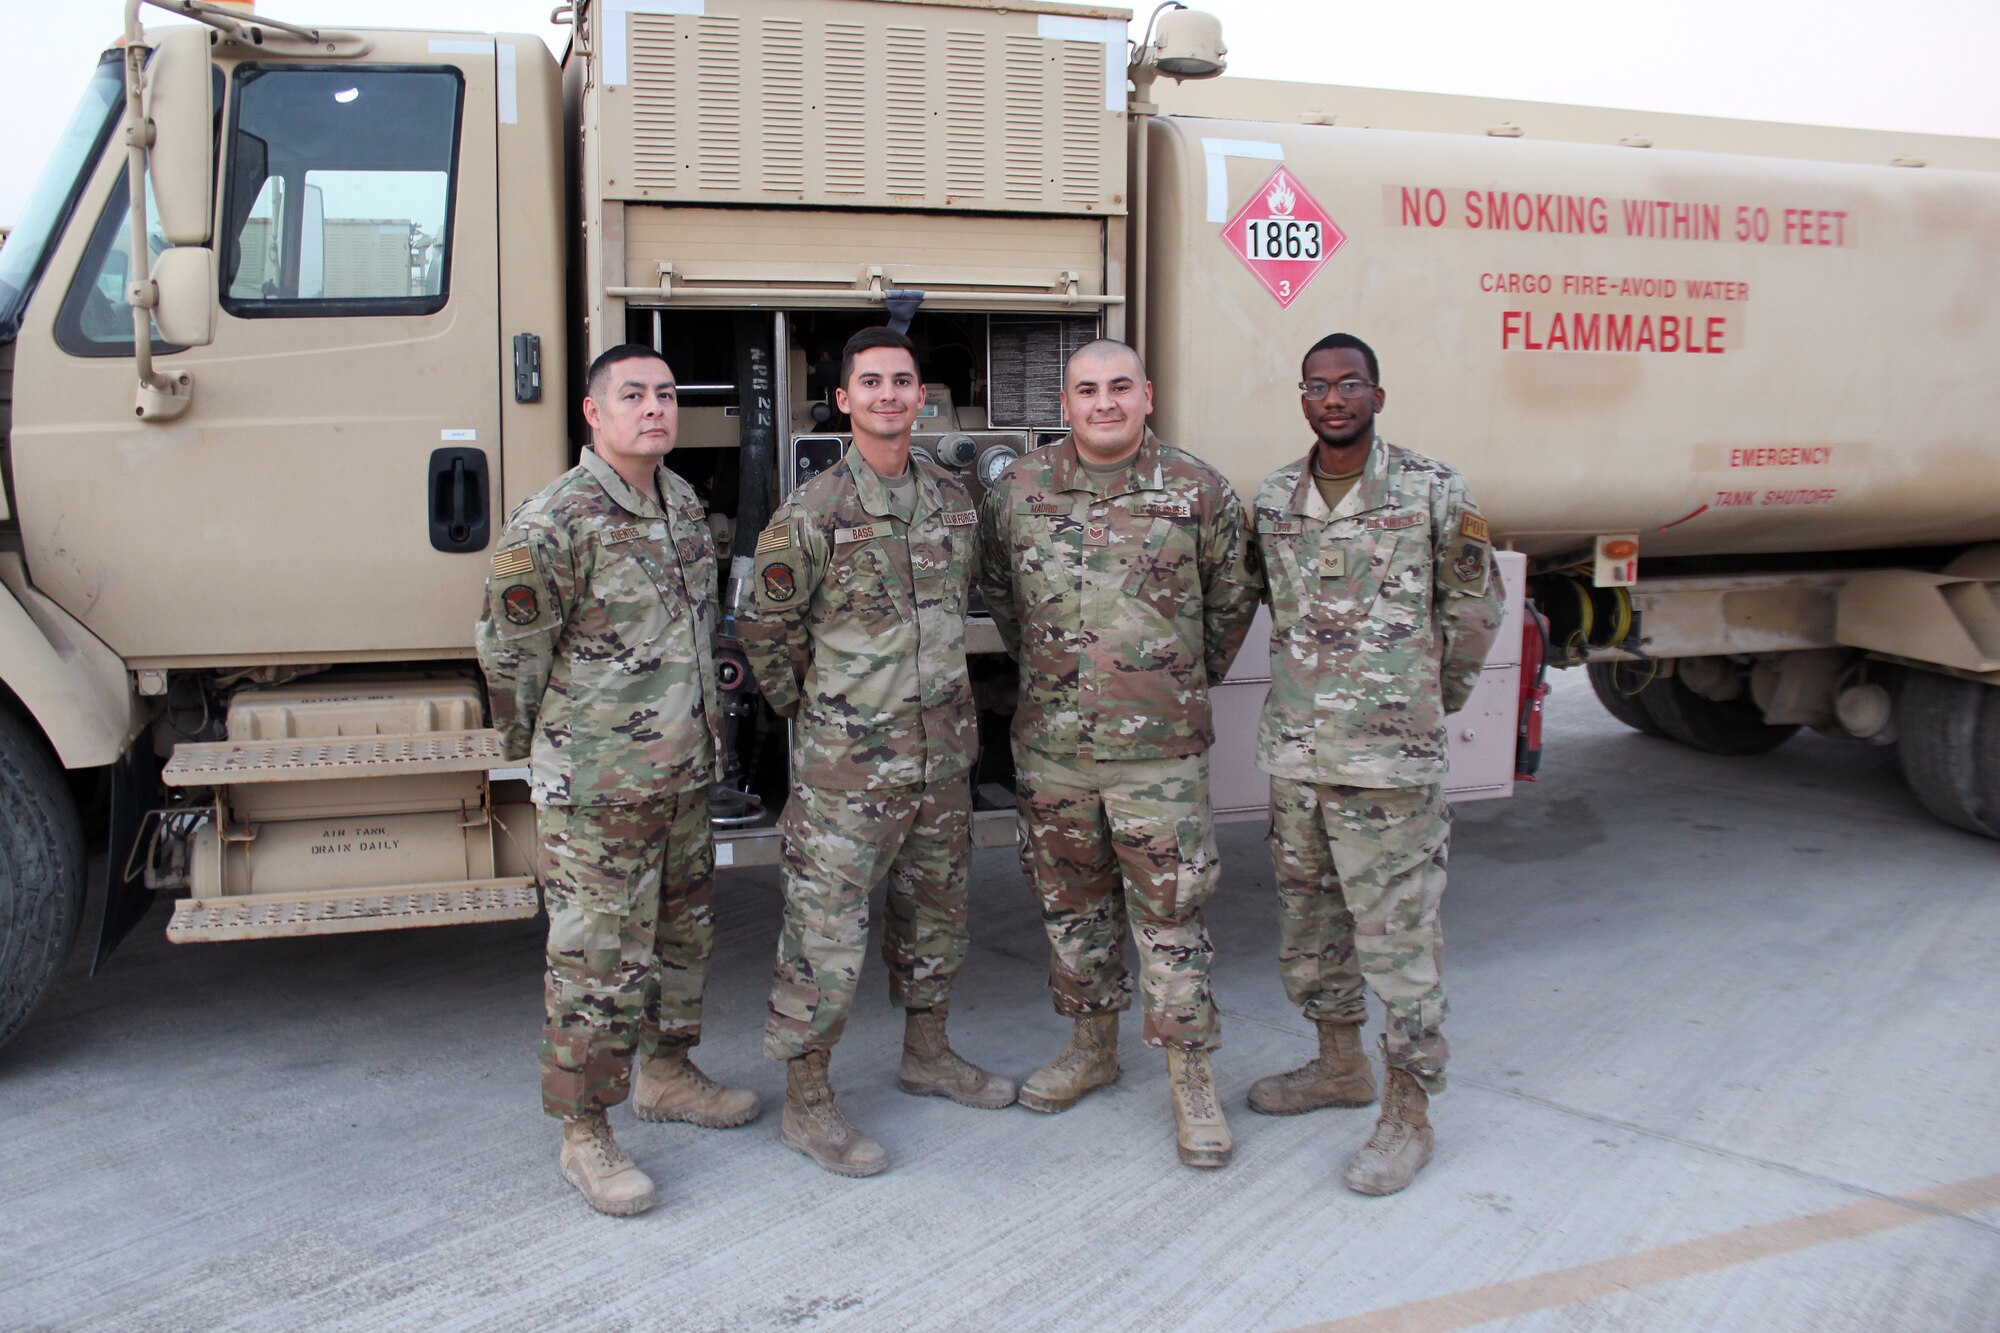 Tech. Sgt. Alfredo Fuentes, Senior Airman Ryan Bass, Staff Sgt. Anthony Madrid and Staff Sgt. Andru Lingo work in the petroleum, oil and lubricants yard at Al Dhafra Air Base, United Arab Emirates, Dec. 11, 2021. All four Airmen are members of the Air Force Reserve’s 944th Fighter Wing at Luke Air Force Base in Arizona. (U.S. Air Force photo by Master Sgt. Dan Heaton)